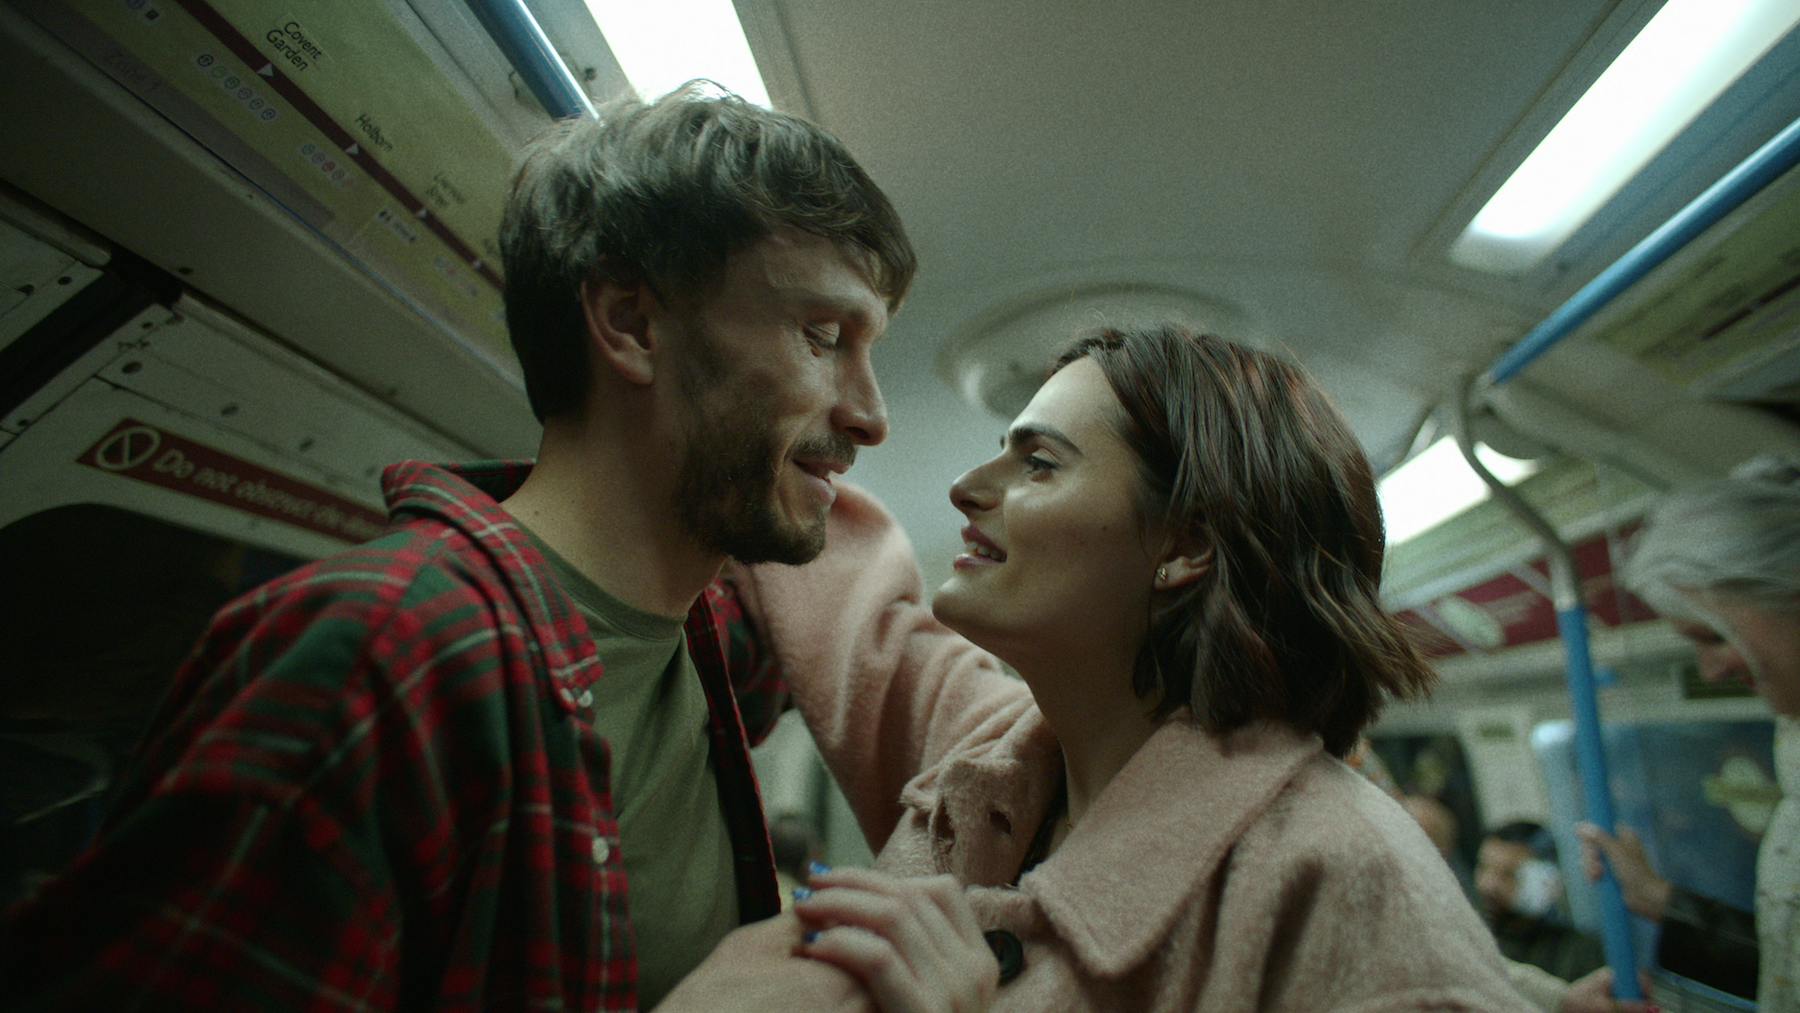 richard gadd as donny dunn and nava mau as teri, standing in a subway car, in 'Baby Reindeer'